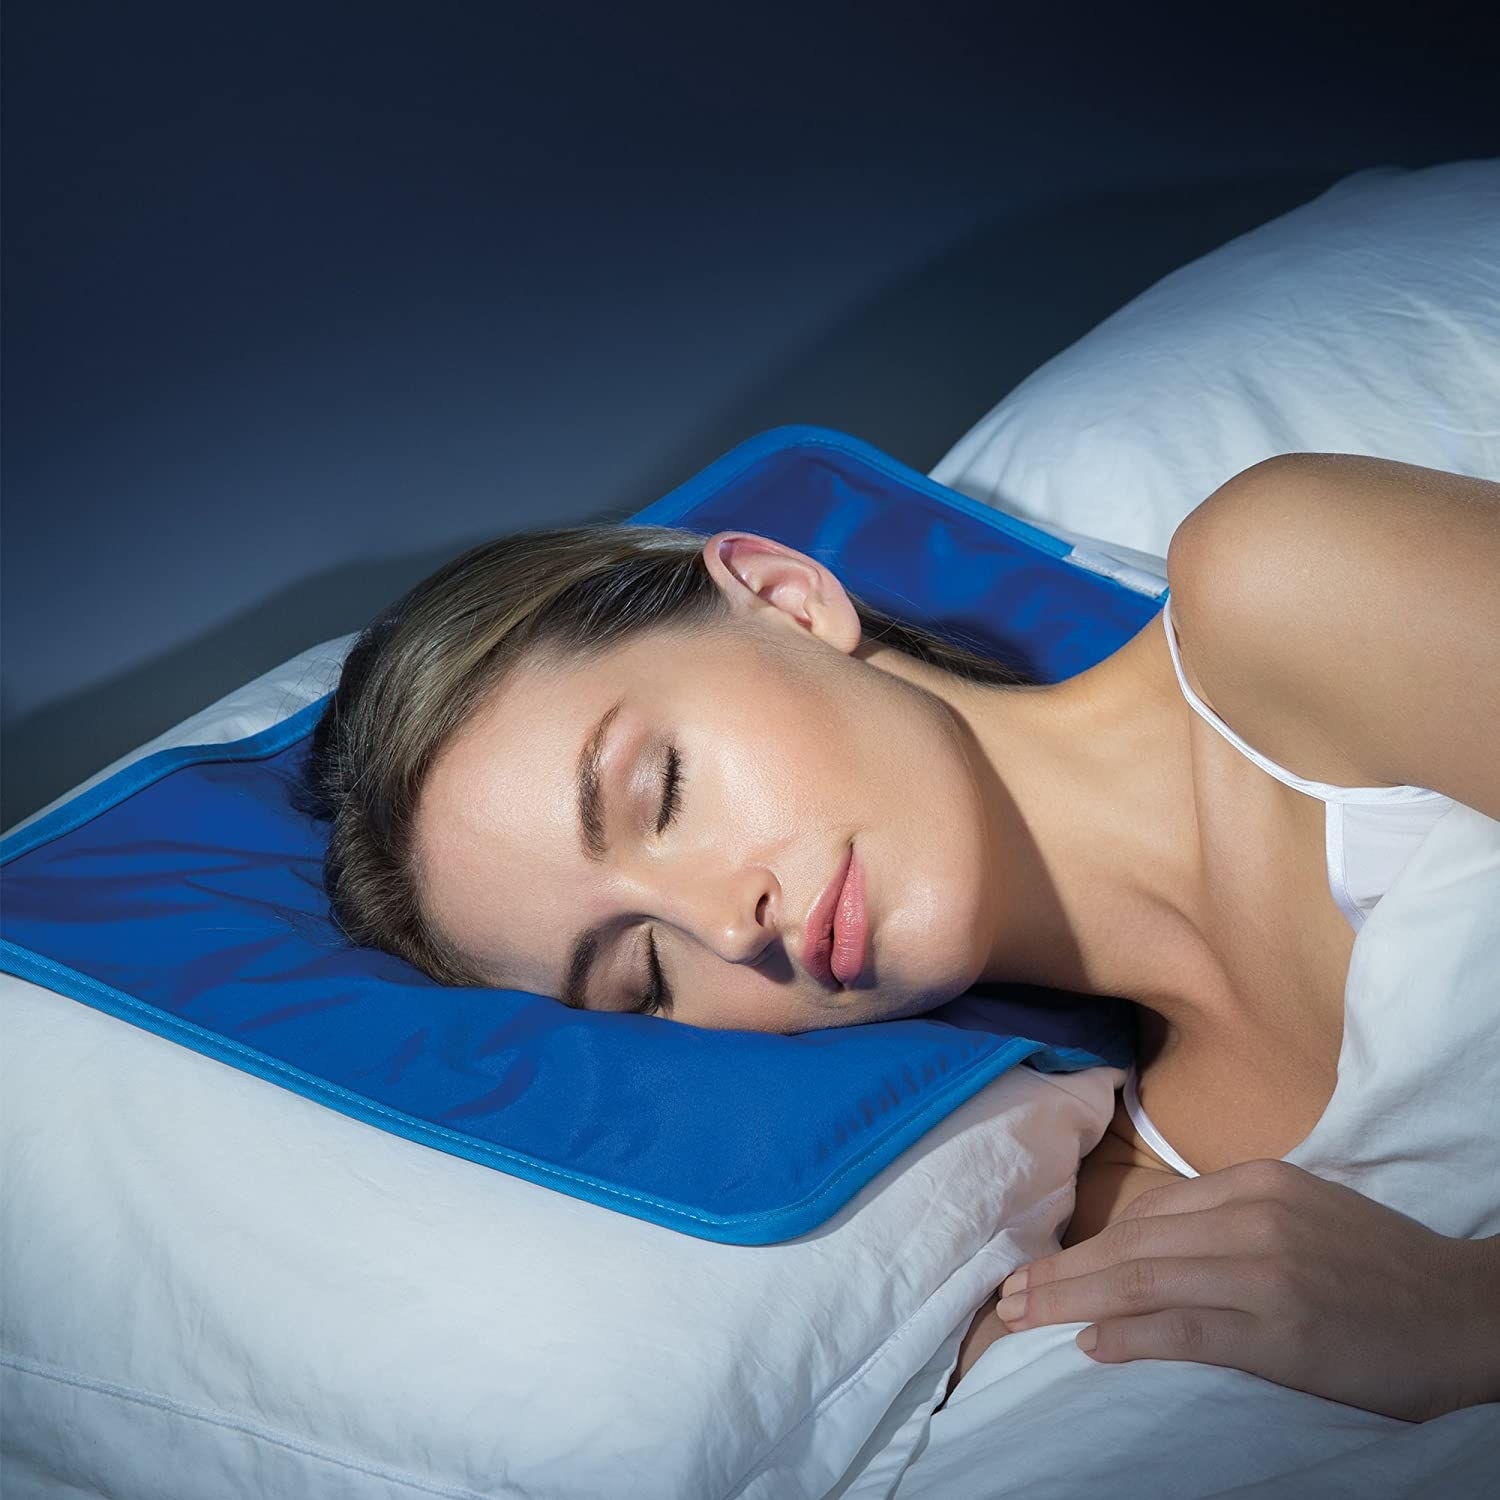 18 Highly-Rated Products That Can Help You Finally Get A Better Night's Sleep